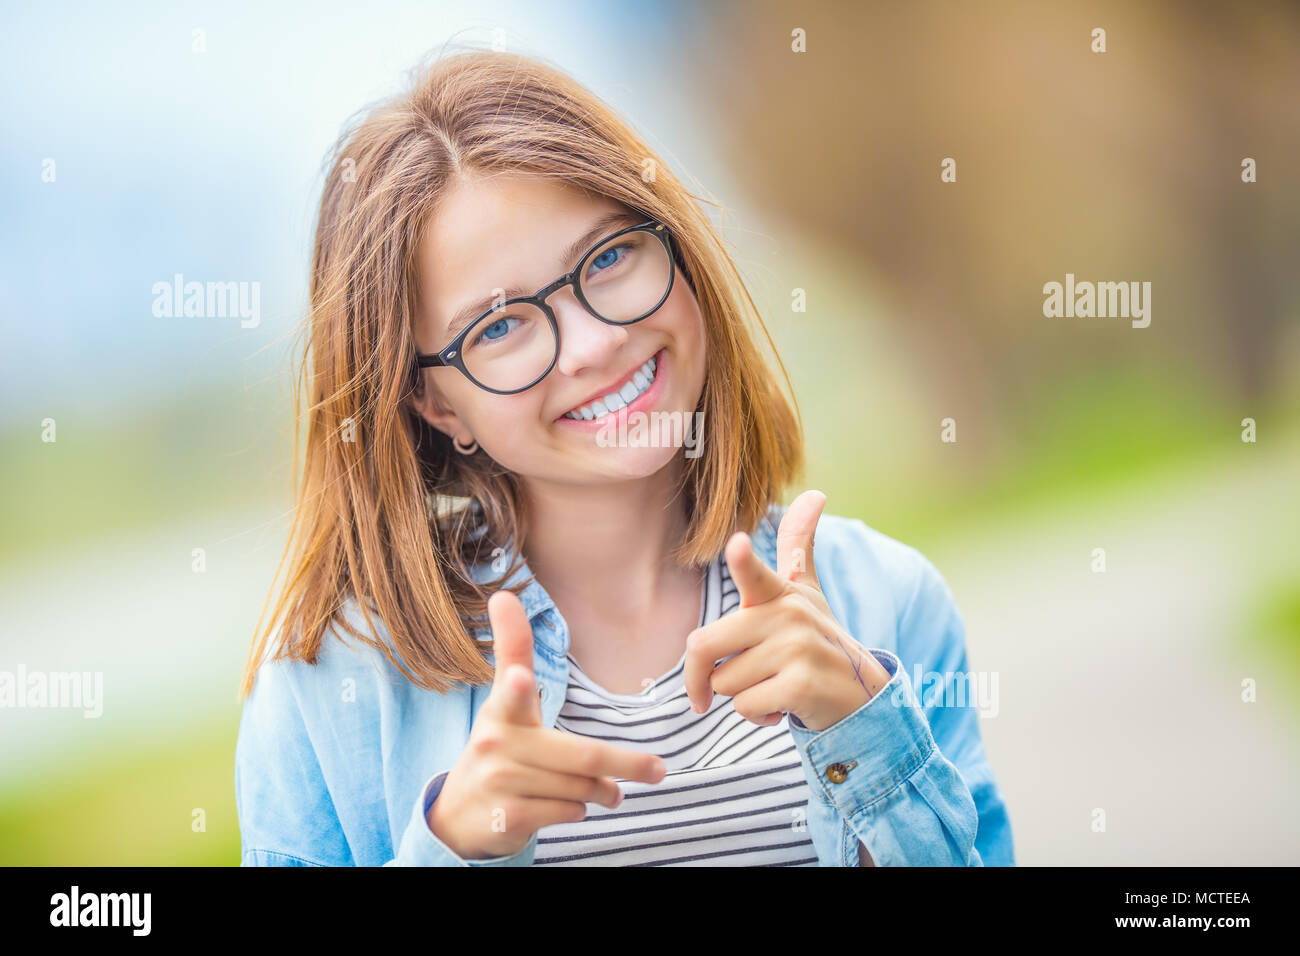 Portrait of happy smilling teenage young girl with glasses and beautiful smile showing with enthusiasm to you. Stock Photo